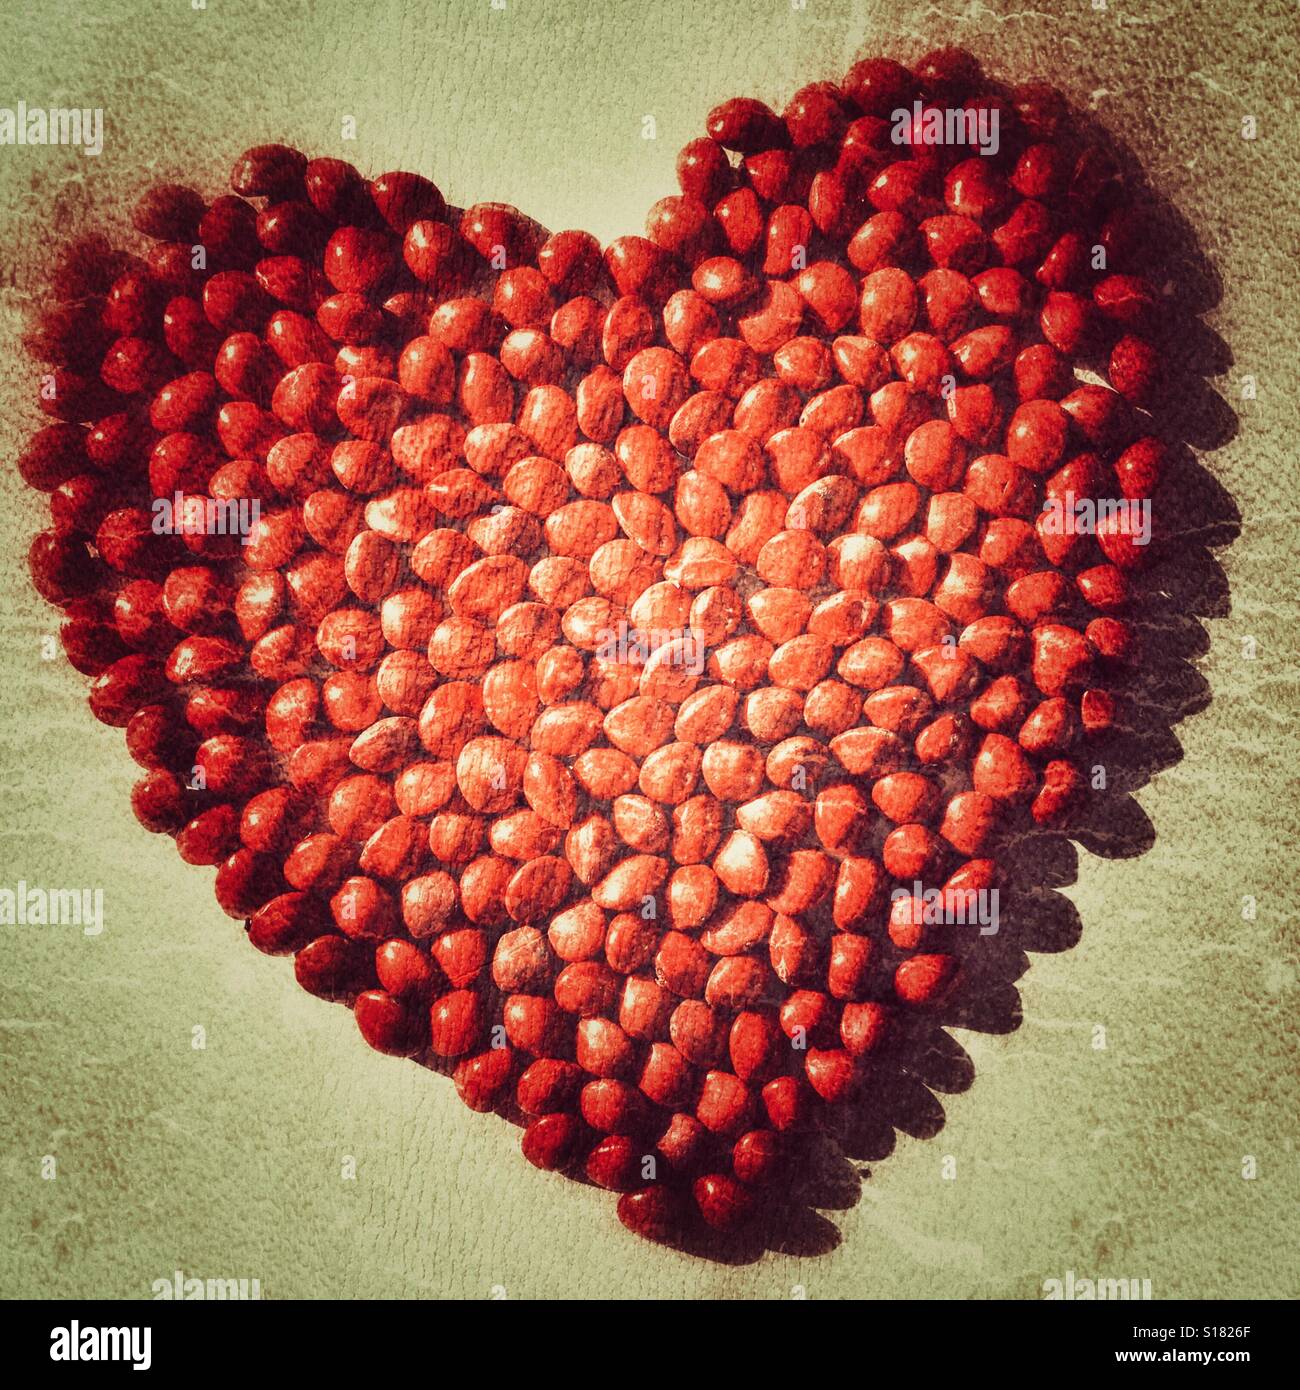 Red heart shape made from Saga seeds. The red, heart shaped seeds come from the saga tree, Adenanthera pavonina Stock Photo